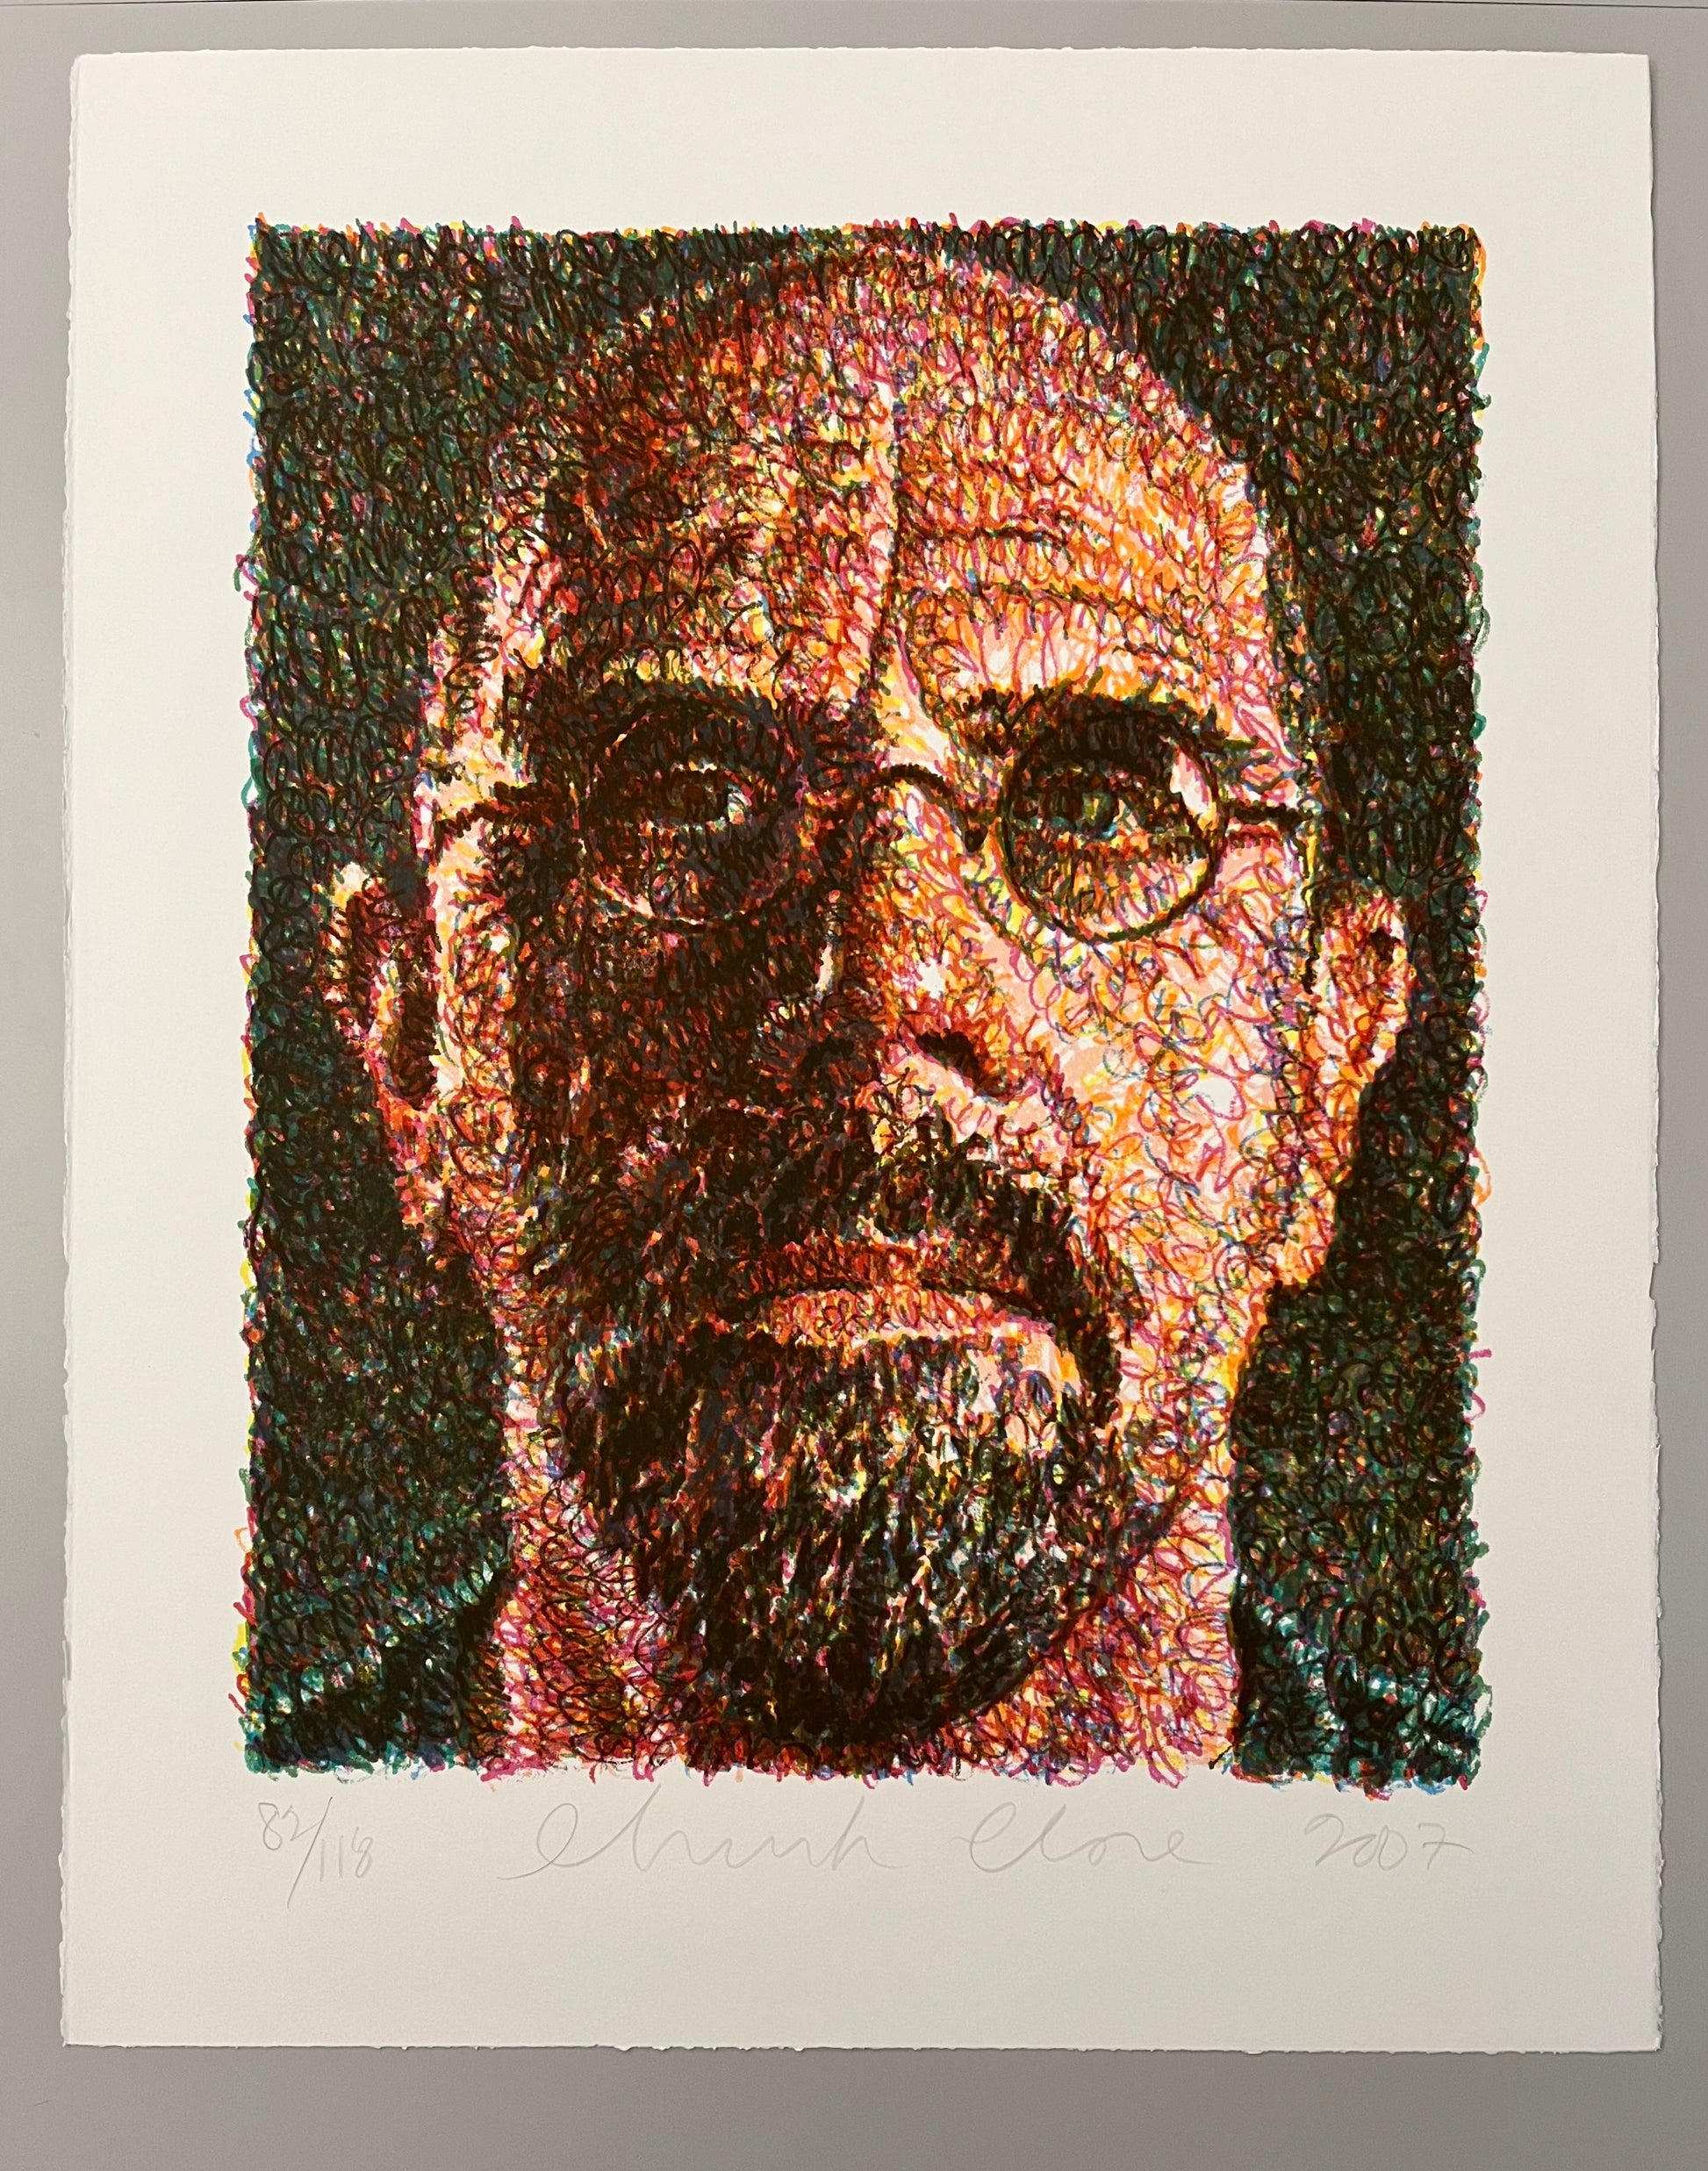 "Self Portrait" by Chuck Close, A highly detailed portrait of a man with glasses, created using intricate, colorful swirling lines. The abstract style emphasizes texture and depth, giving the image a vibrant, dynamic appearance. 